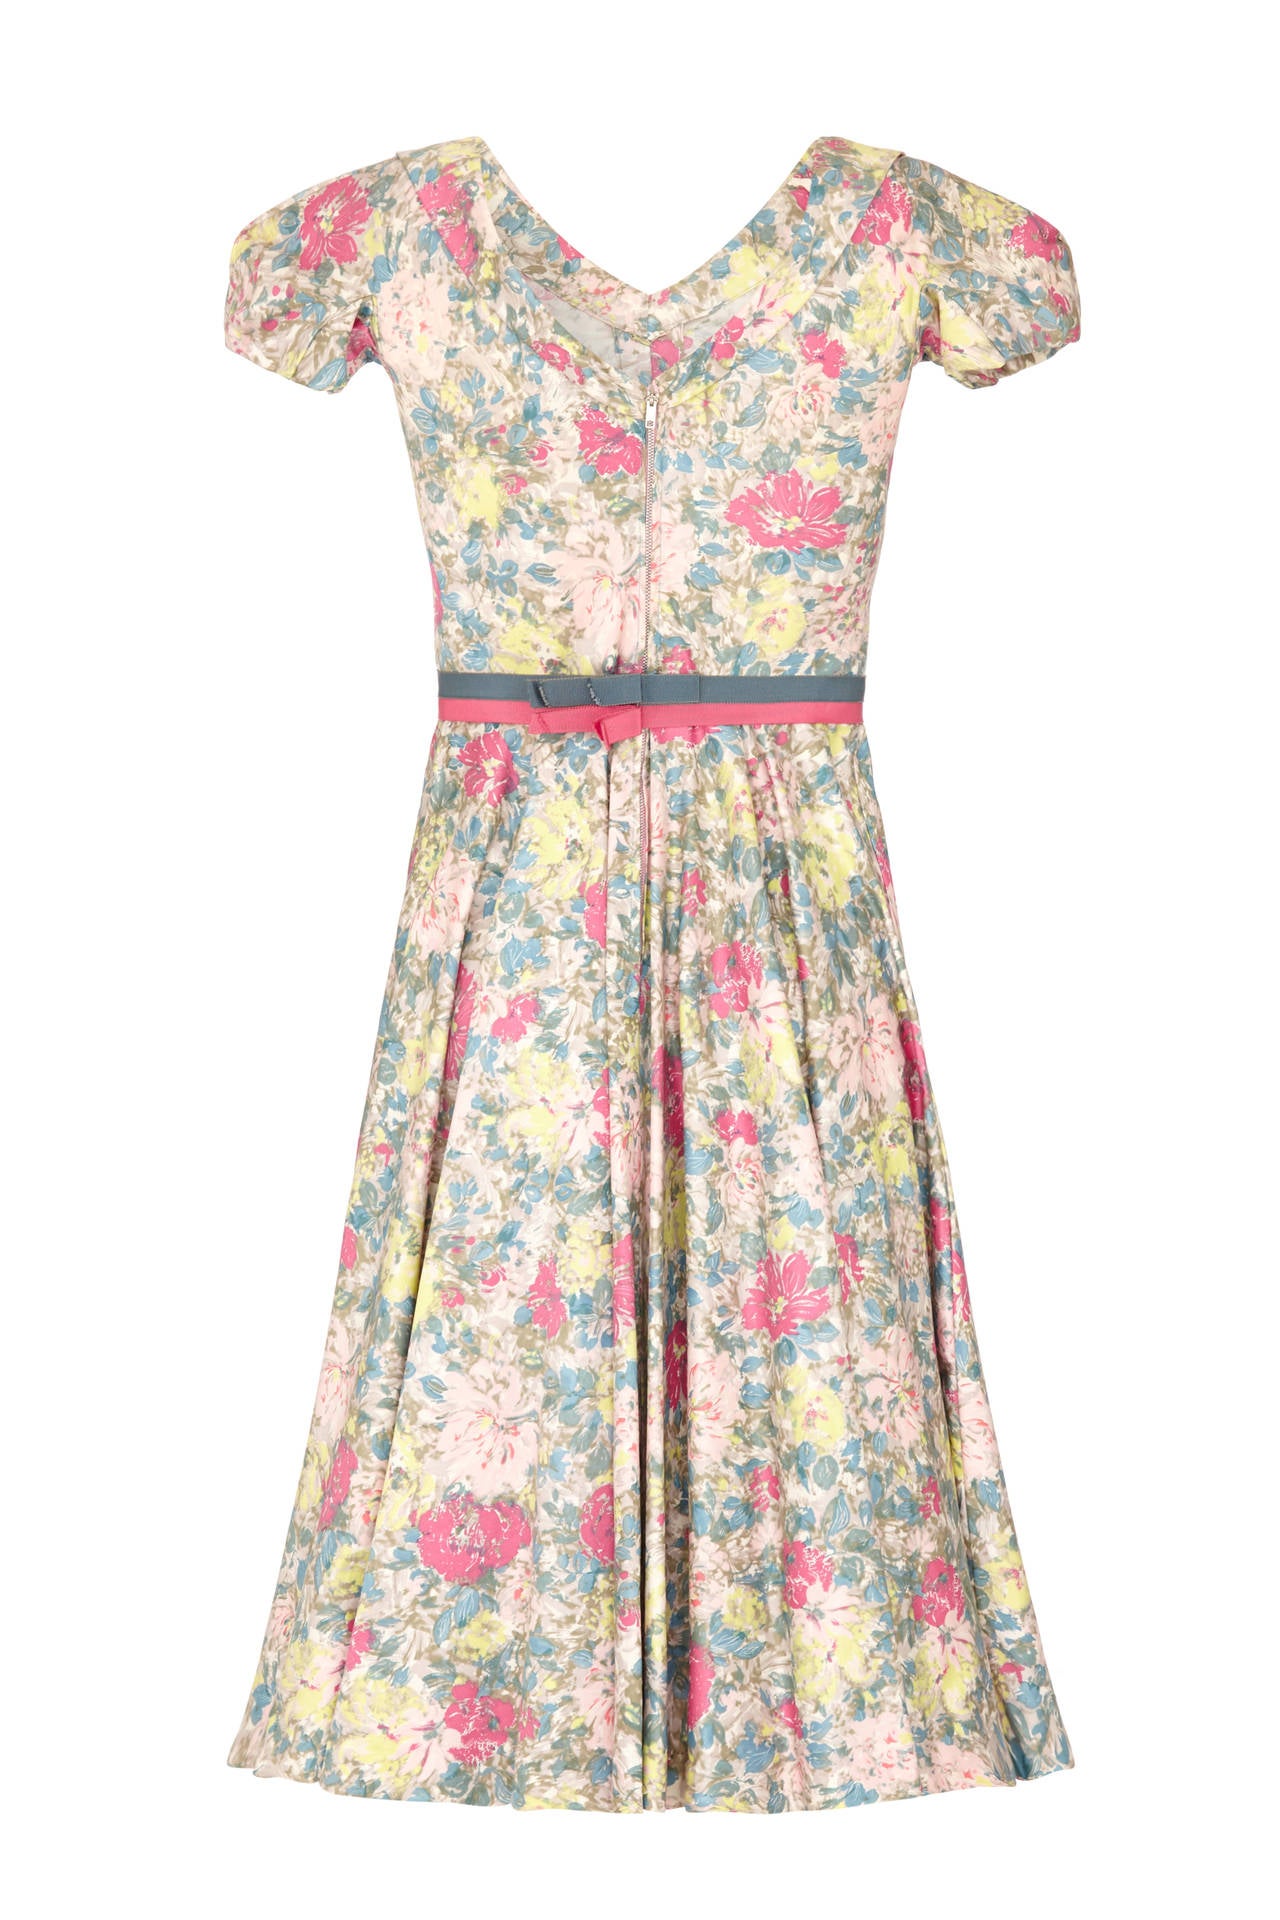 This enchanting 1950s or early 1960s floral print polished cotton dress from American label Jane Derby when Oscar de la Renta was the head designer showcases some exquisite tailoring complete with its original grosgrain ribbon belt. The gently